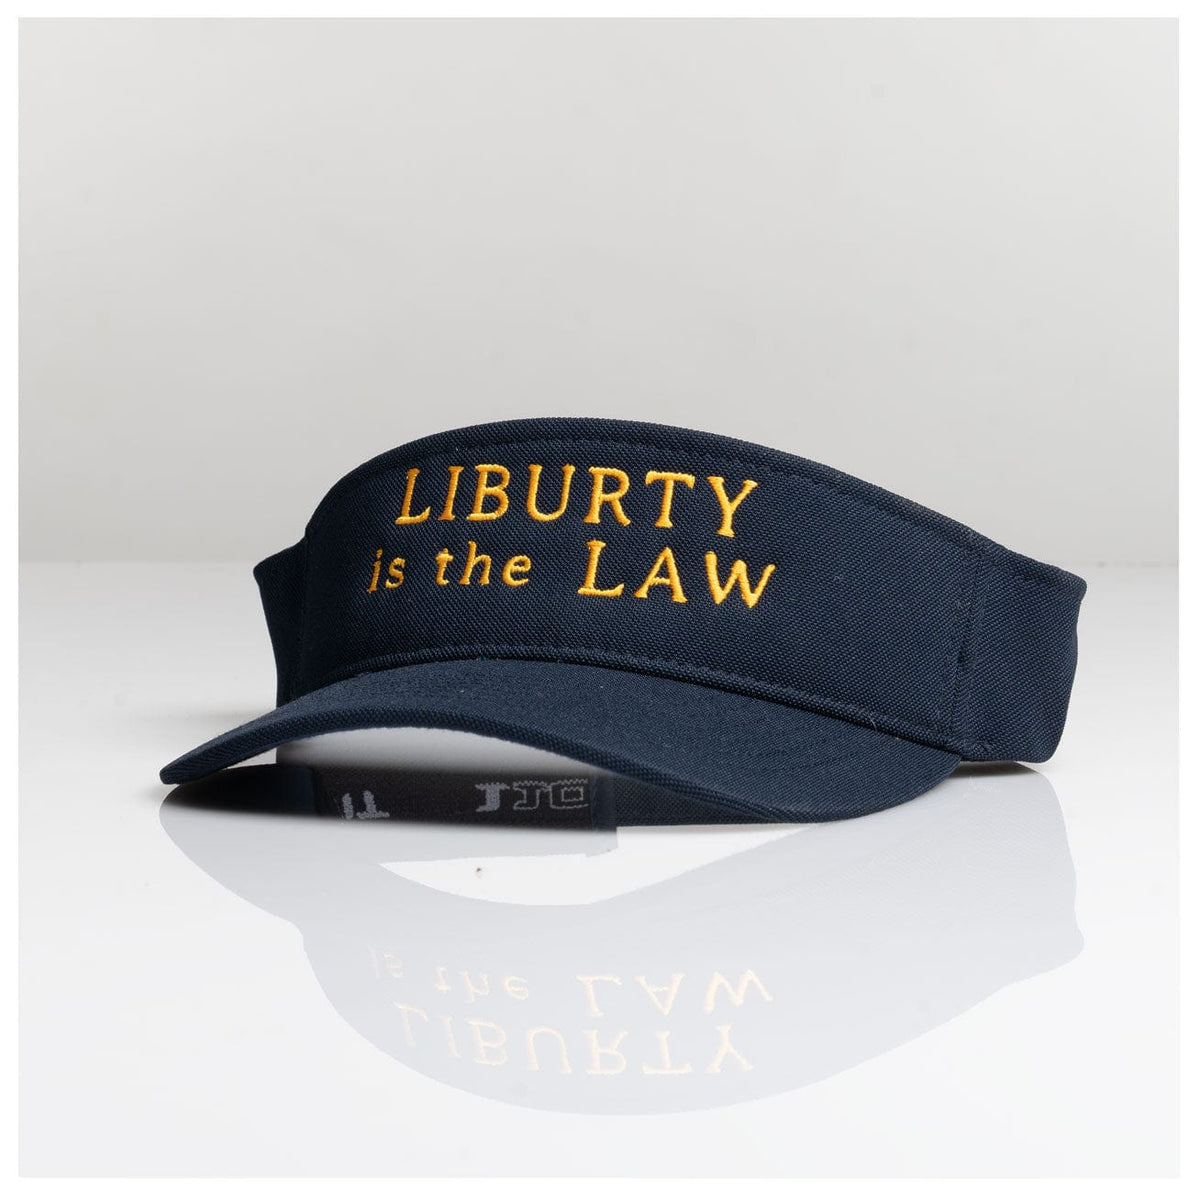 LibURTy is the LAW Visor